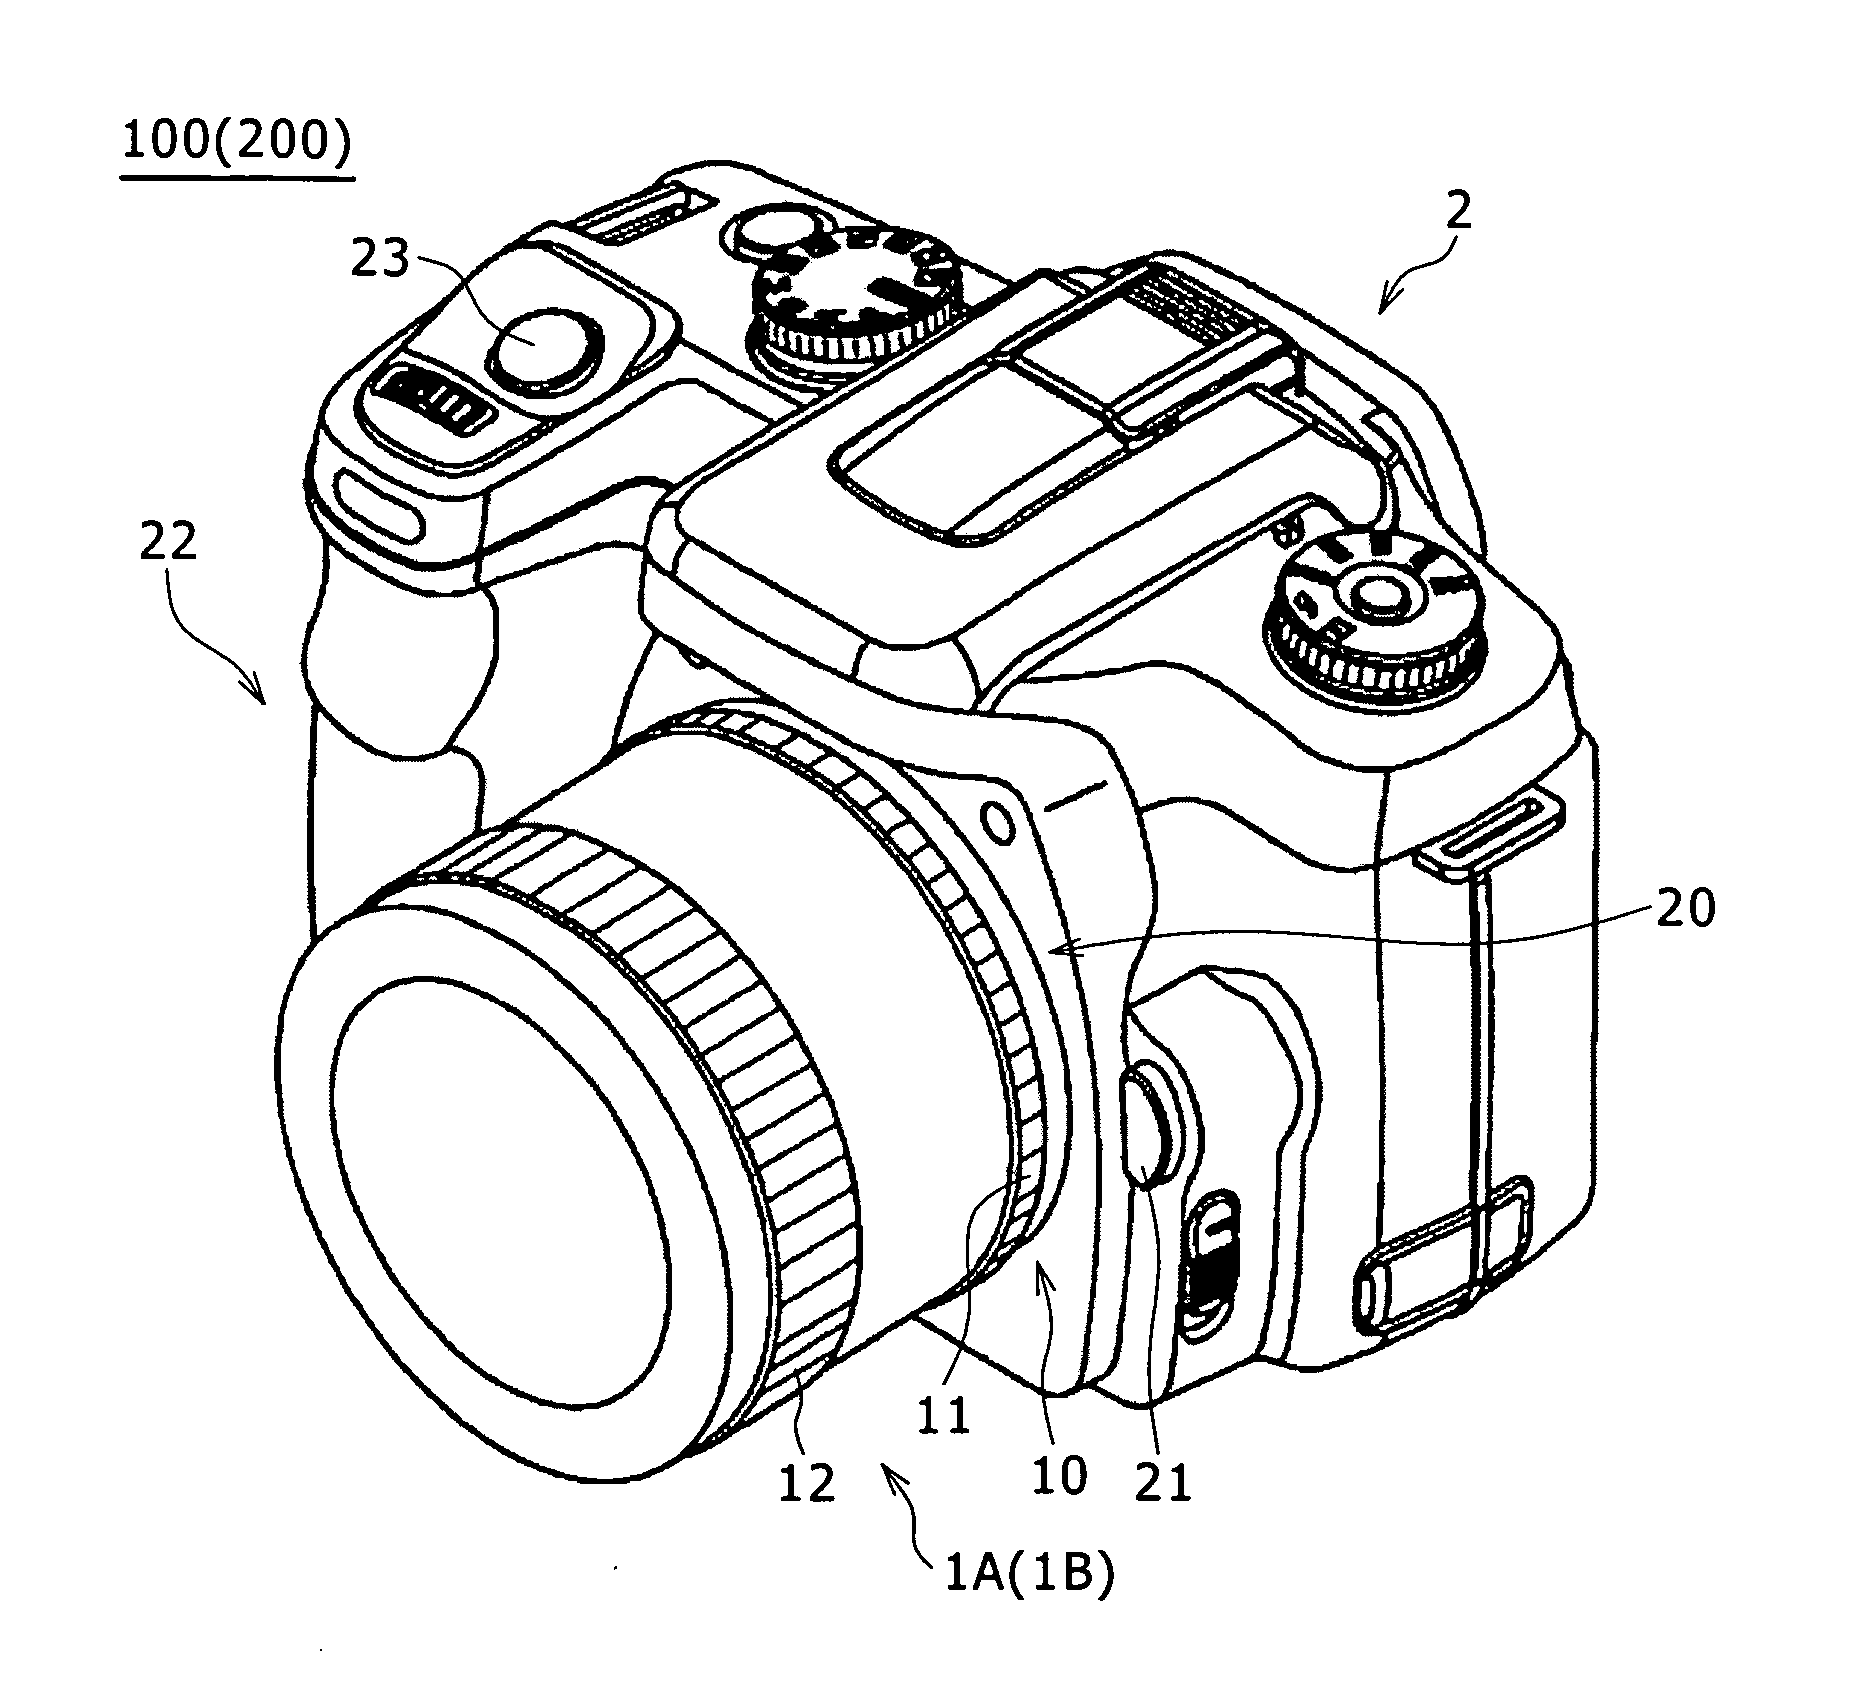 Position detection apparatus, image taking apparatus and position detection method